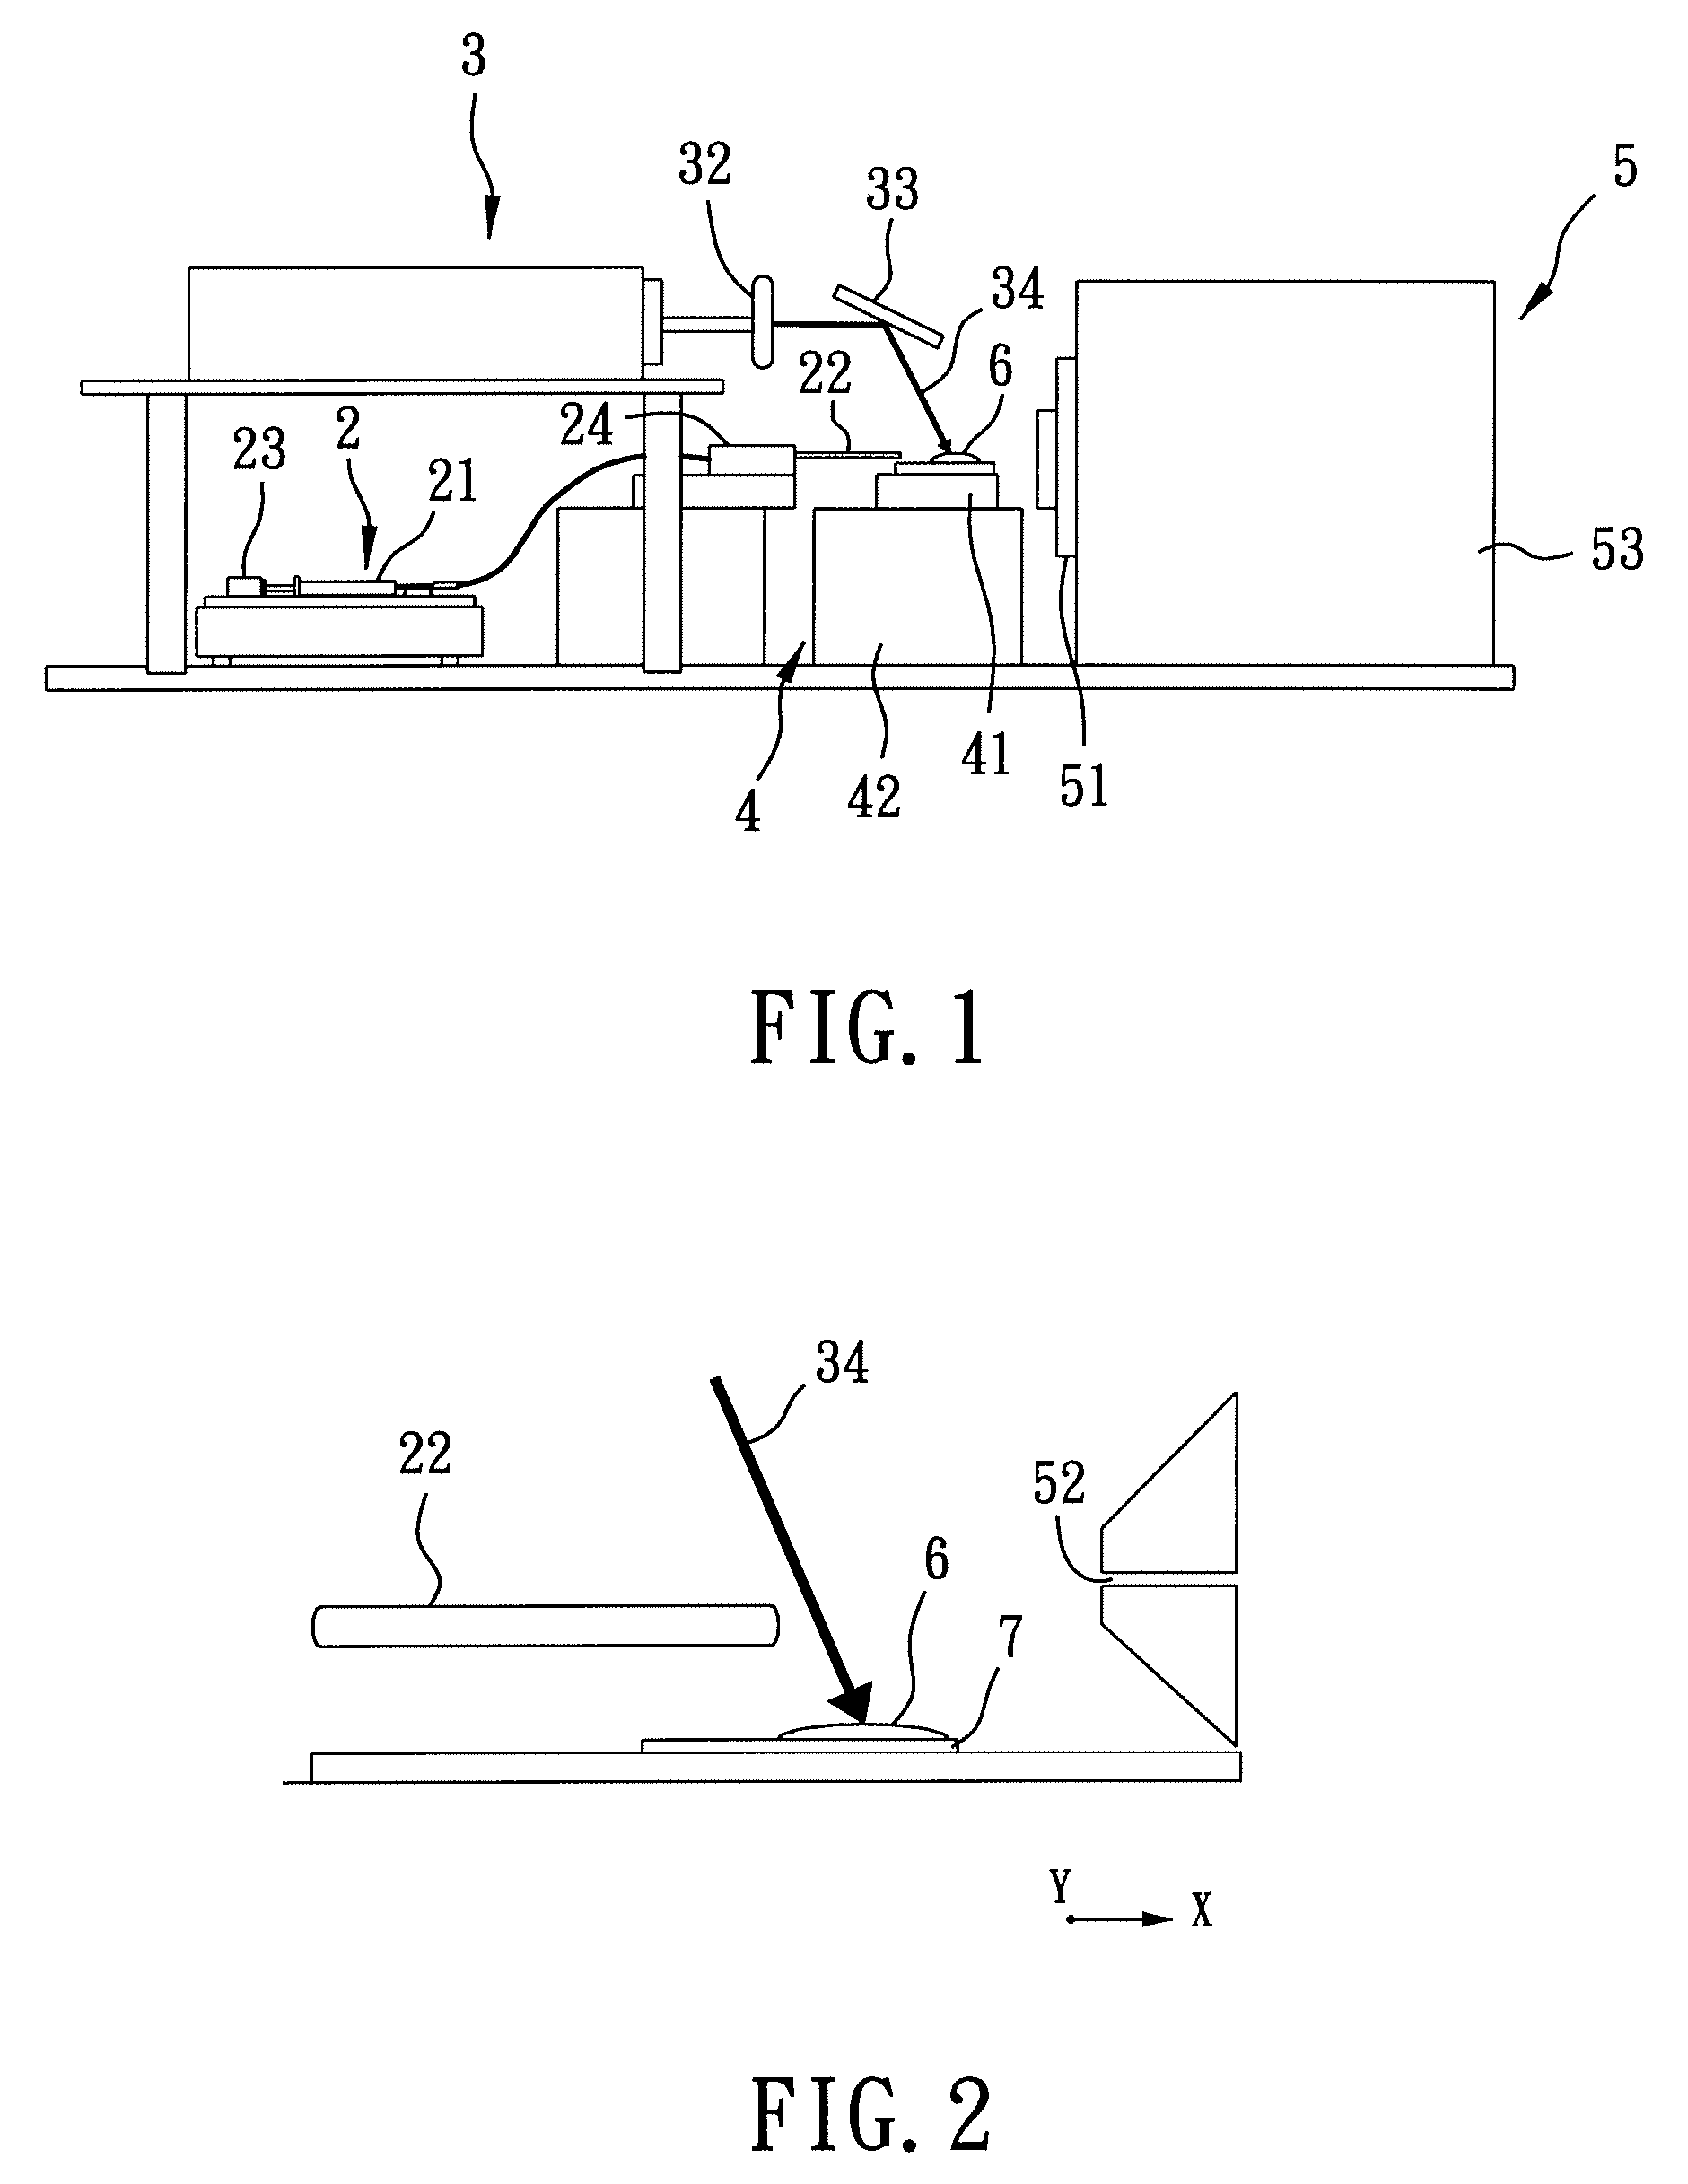 Mass spectrometric imaging method under ambient conditions using electrospray-assisted laser desorption ionization mass spectrometry